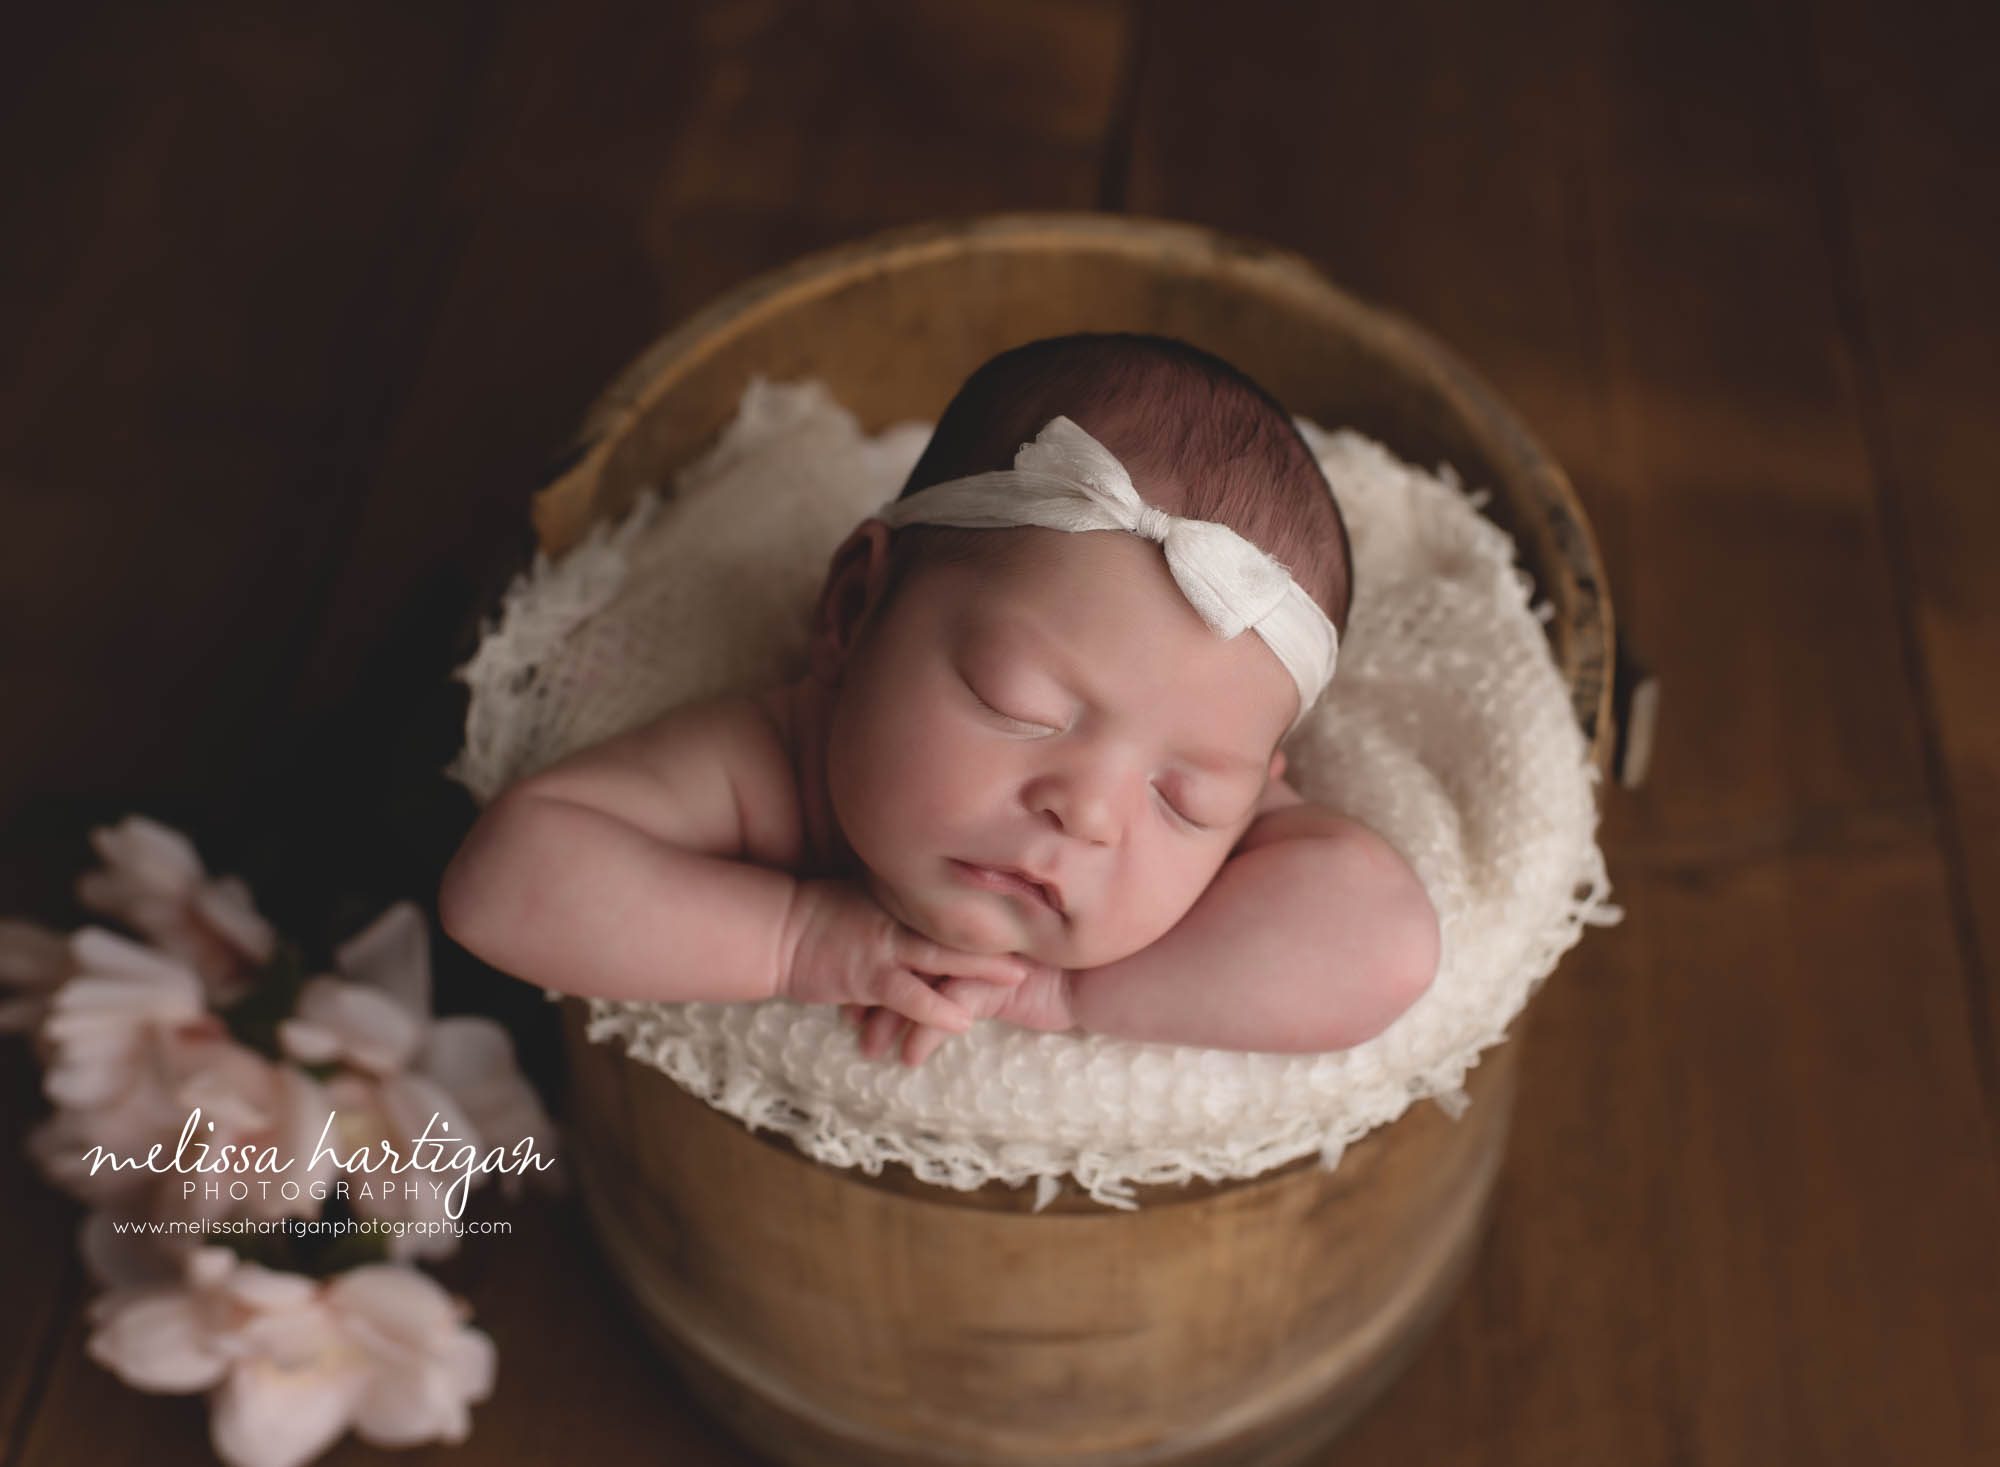 newborn baby girl posed in wooden bucket with head on hands wearing bow headband